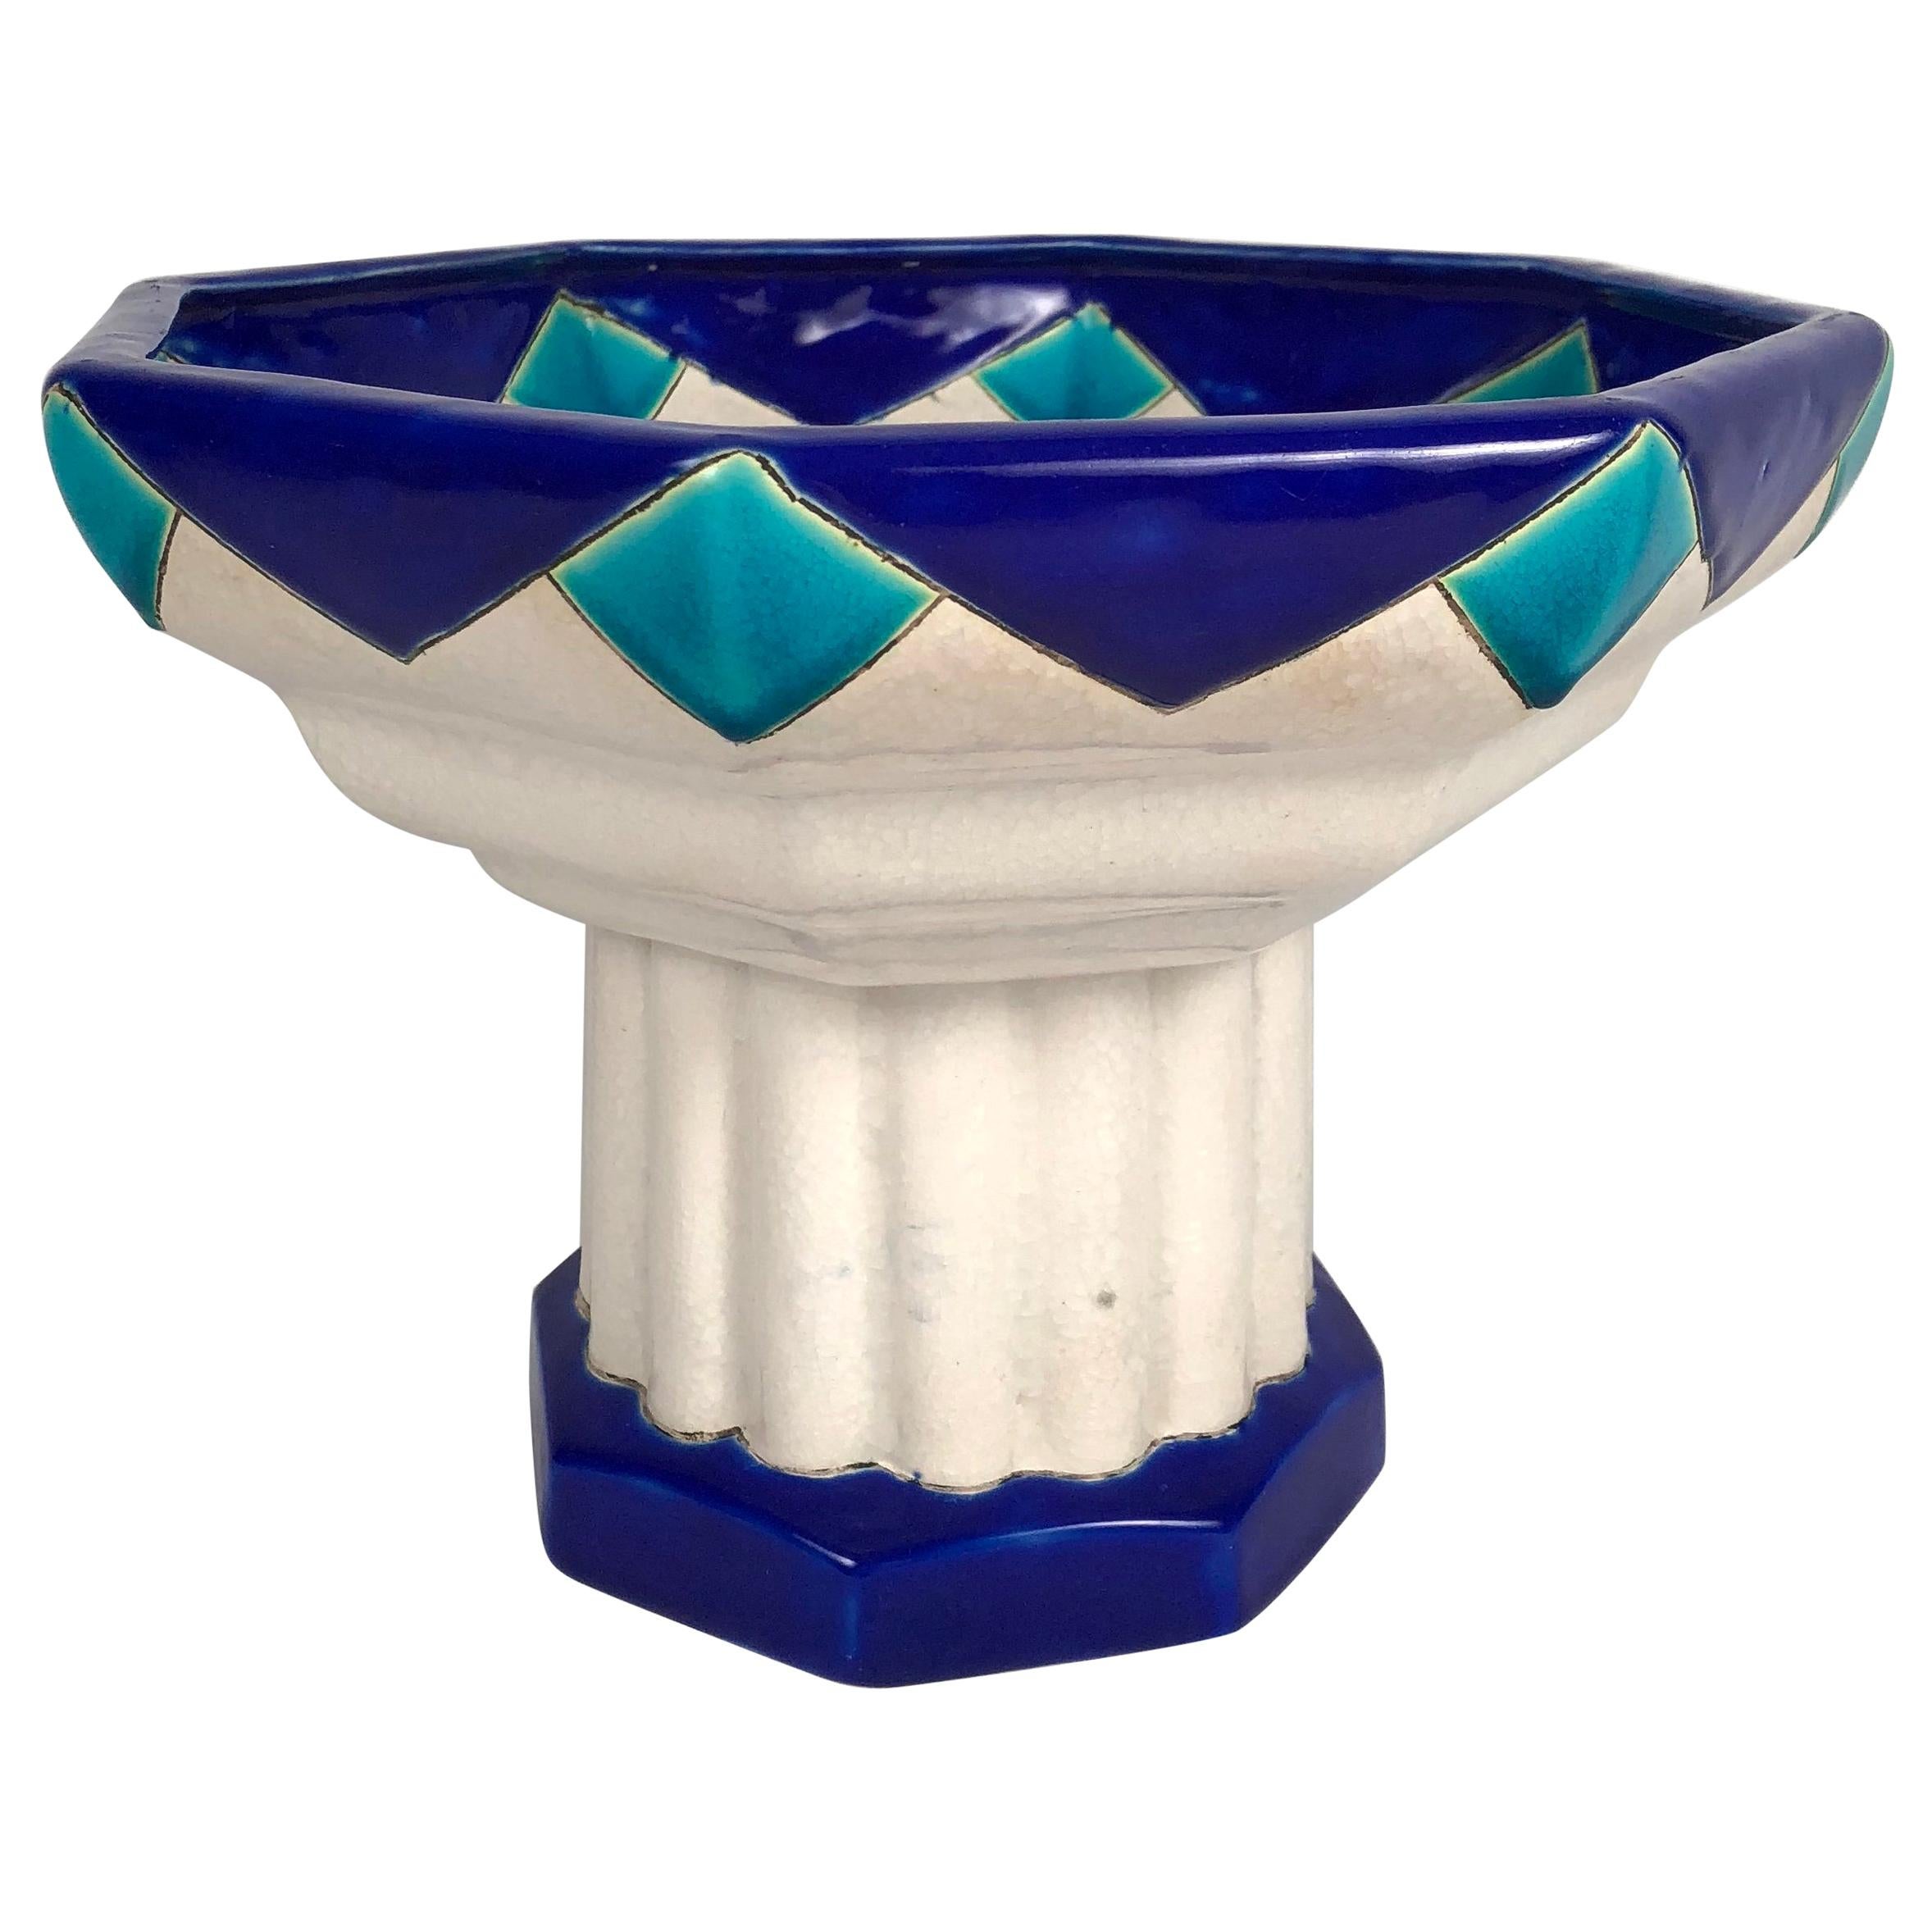 Art Deco Period Blue Turquoise and White Ceramic Footed Bowl by Boch Frères